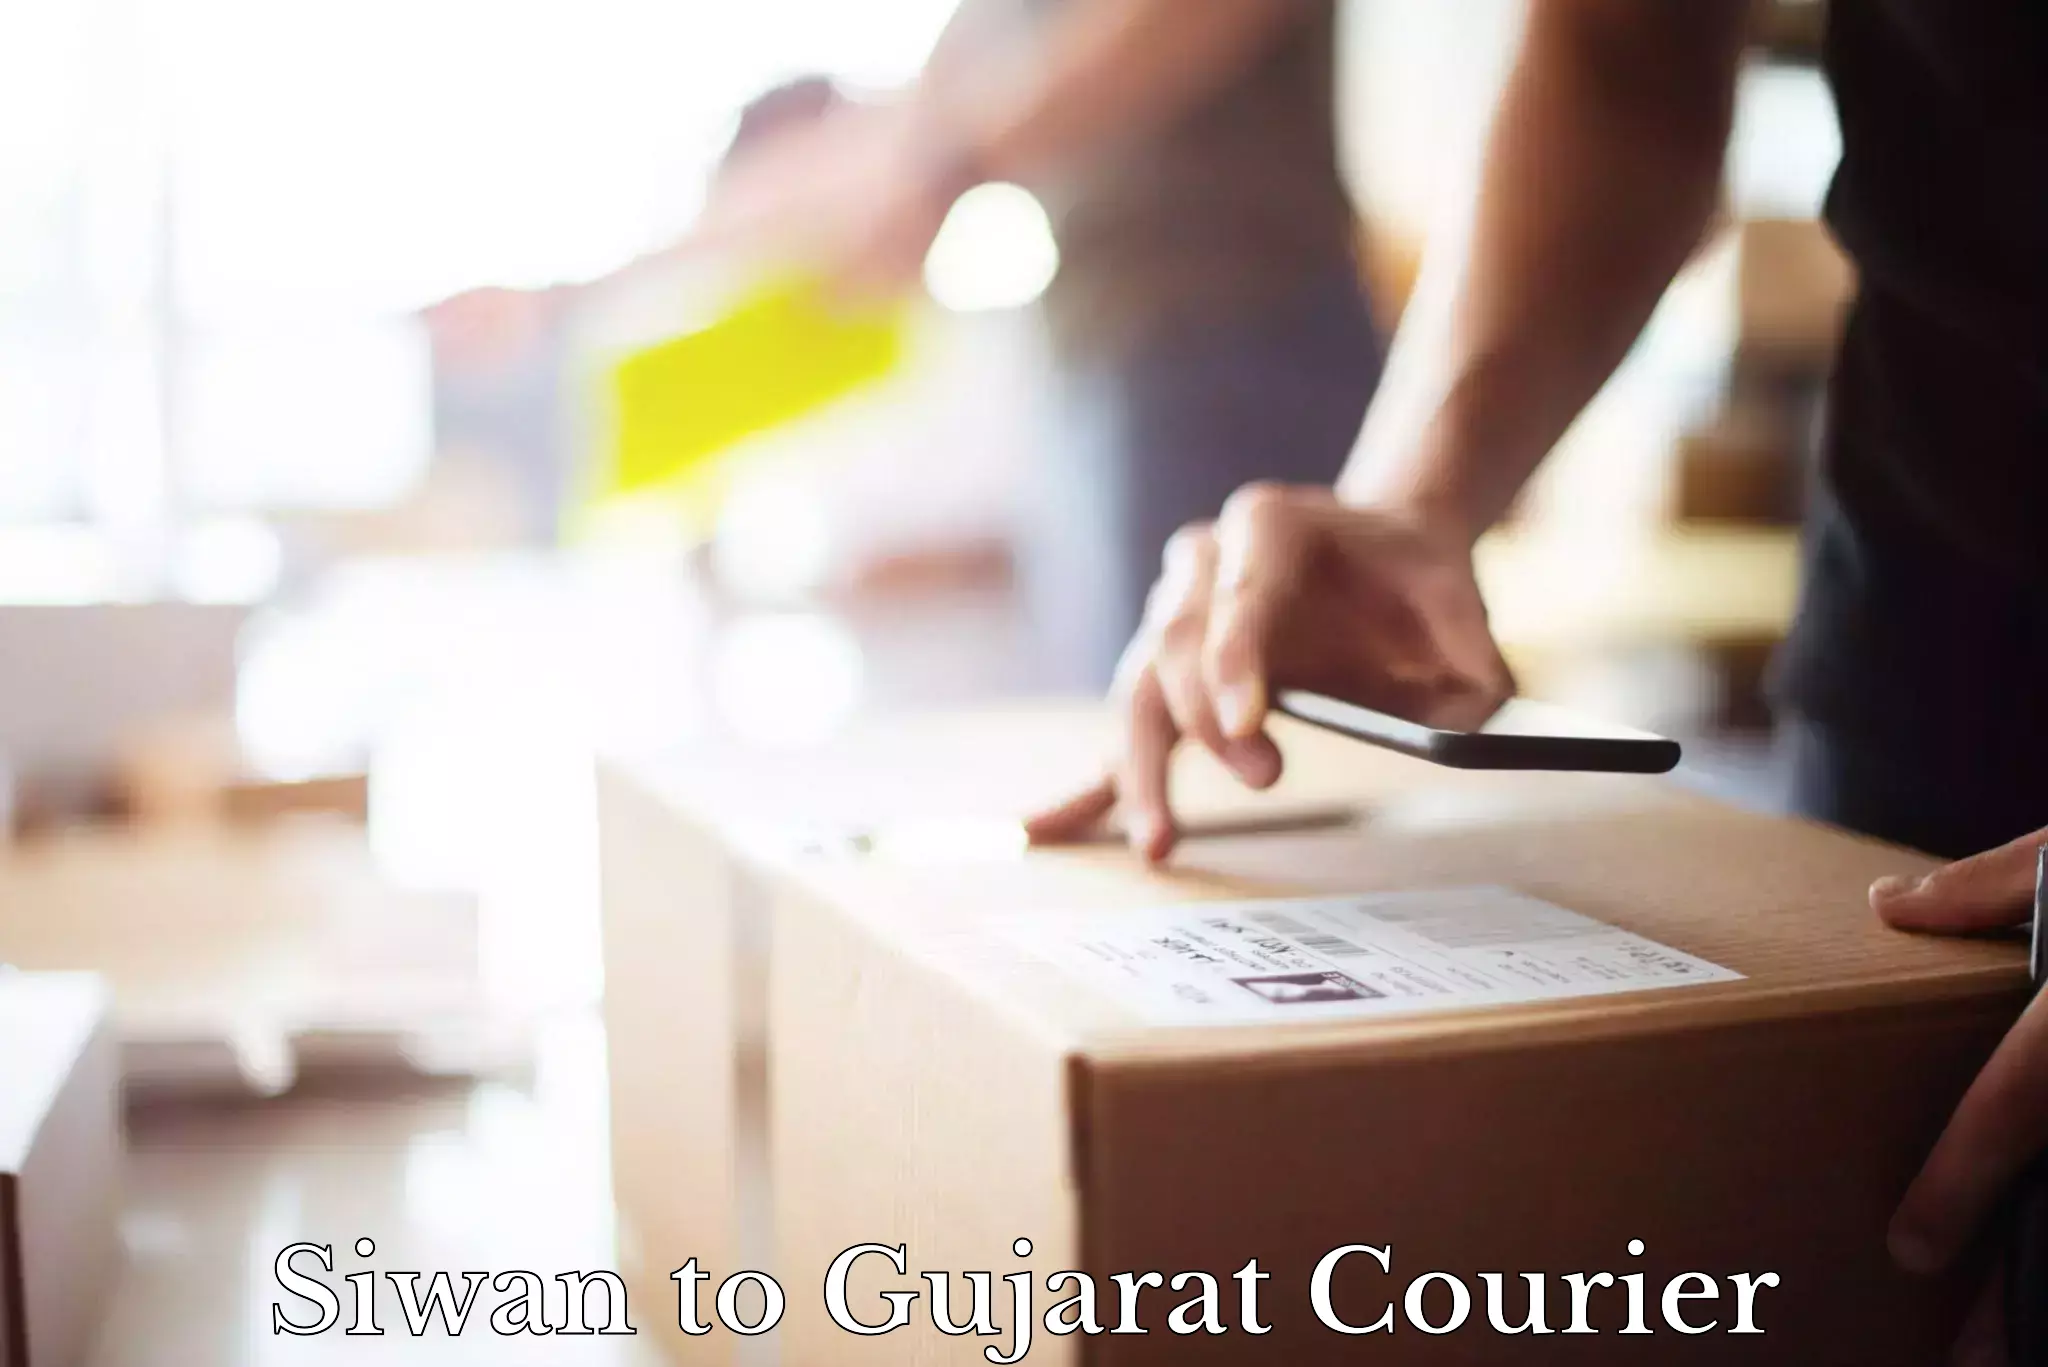 Reliable logistics providers Siwan to Jetpur